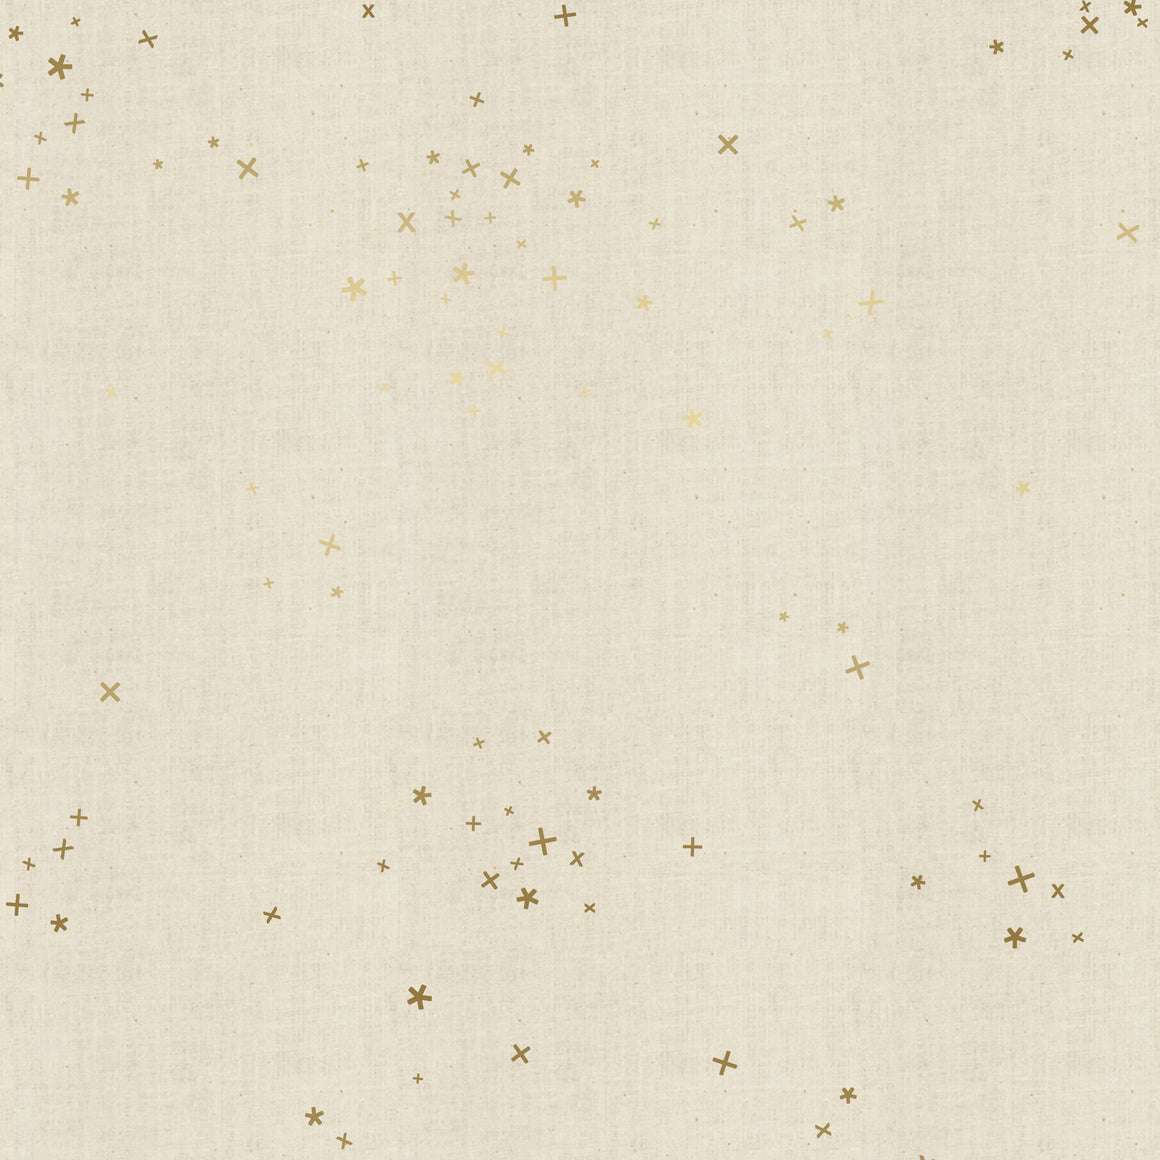 New C+S Basics: Freckles in Unbleached Metallic, Designer Fabric, Cotton + Steel, [variant_title] - Mad About Patchwork